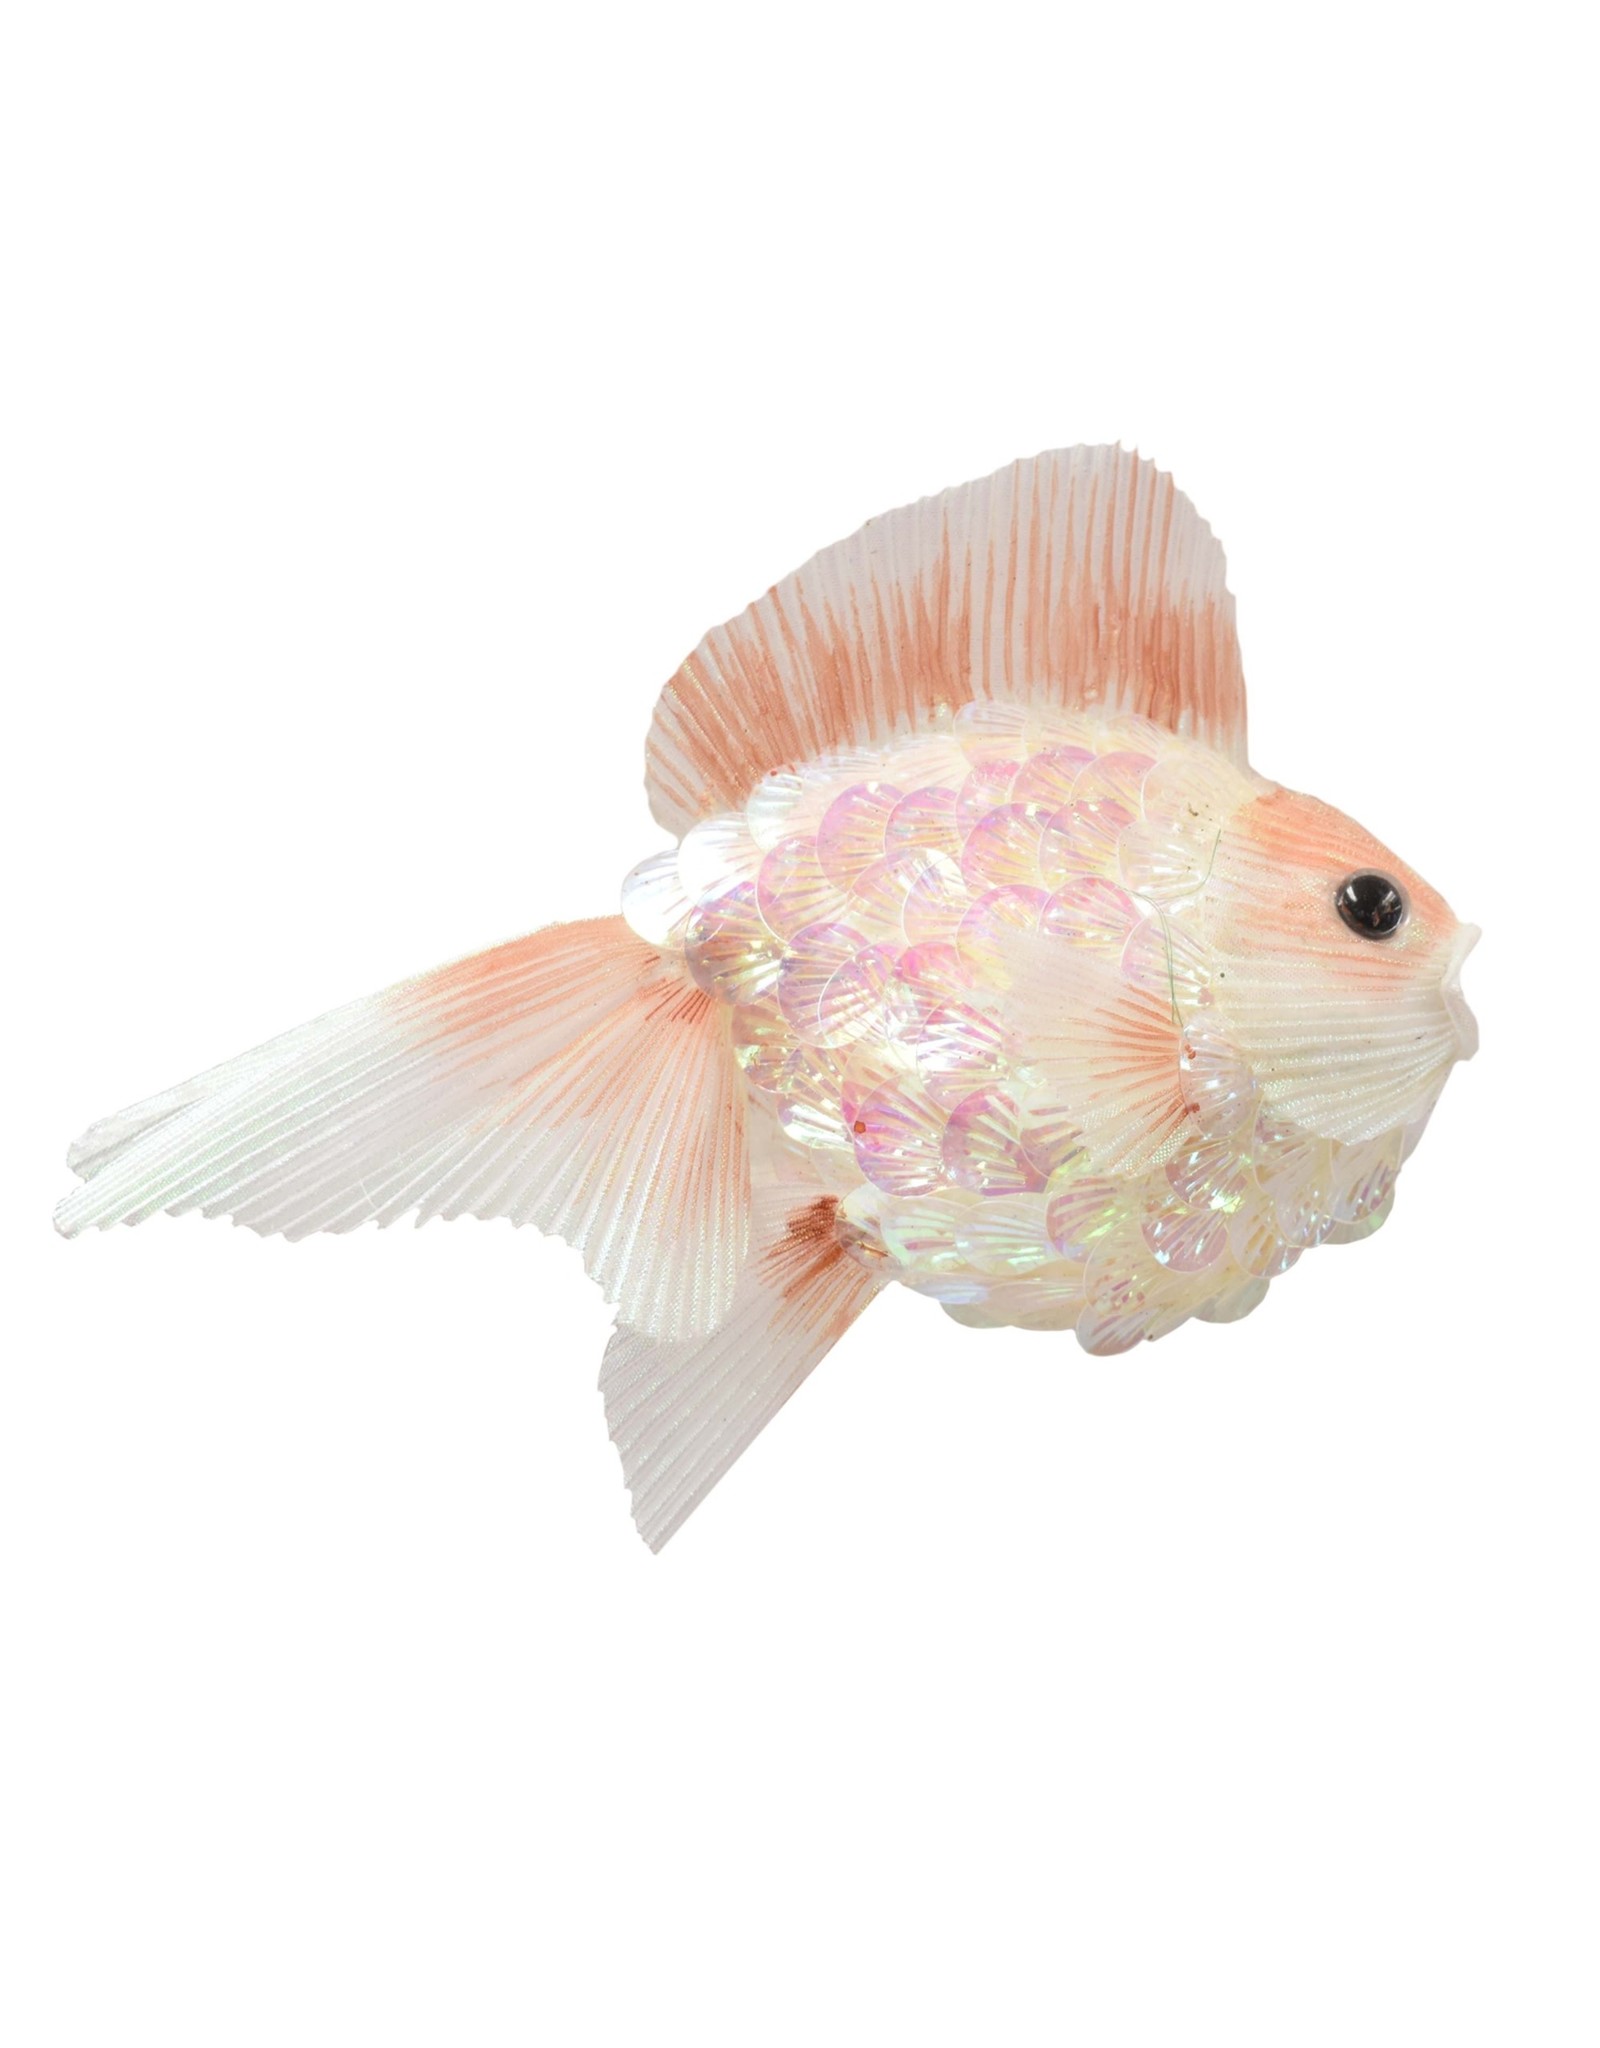 David Christophers Glittered Sequined Gold Fish Coral 8x6 Inch